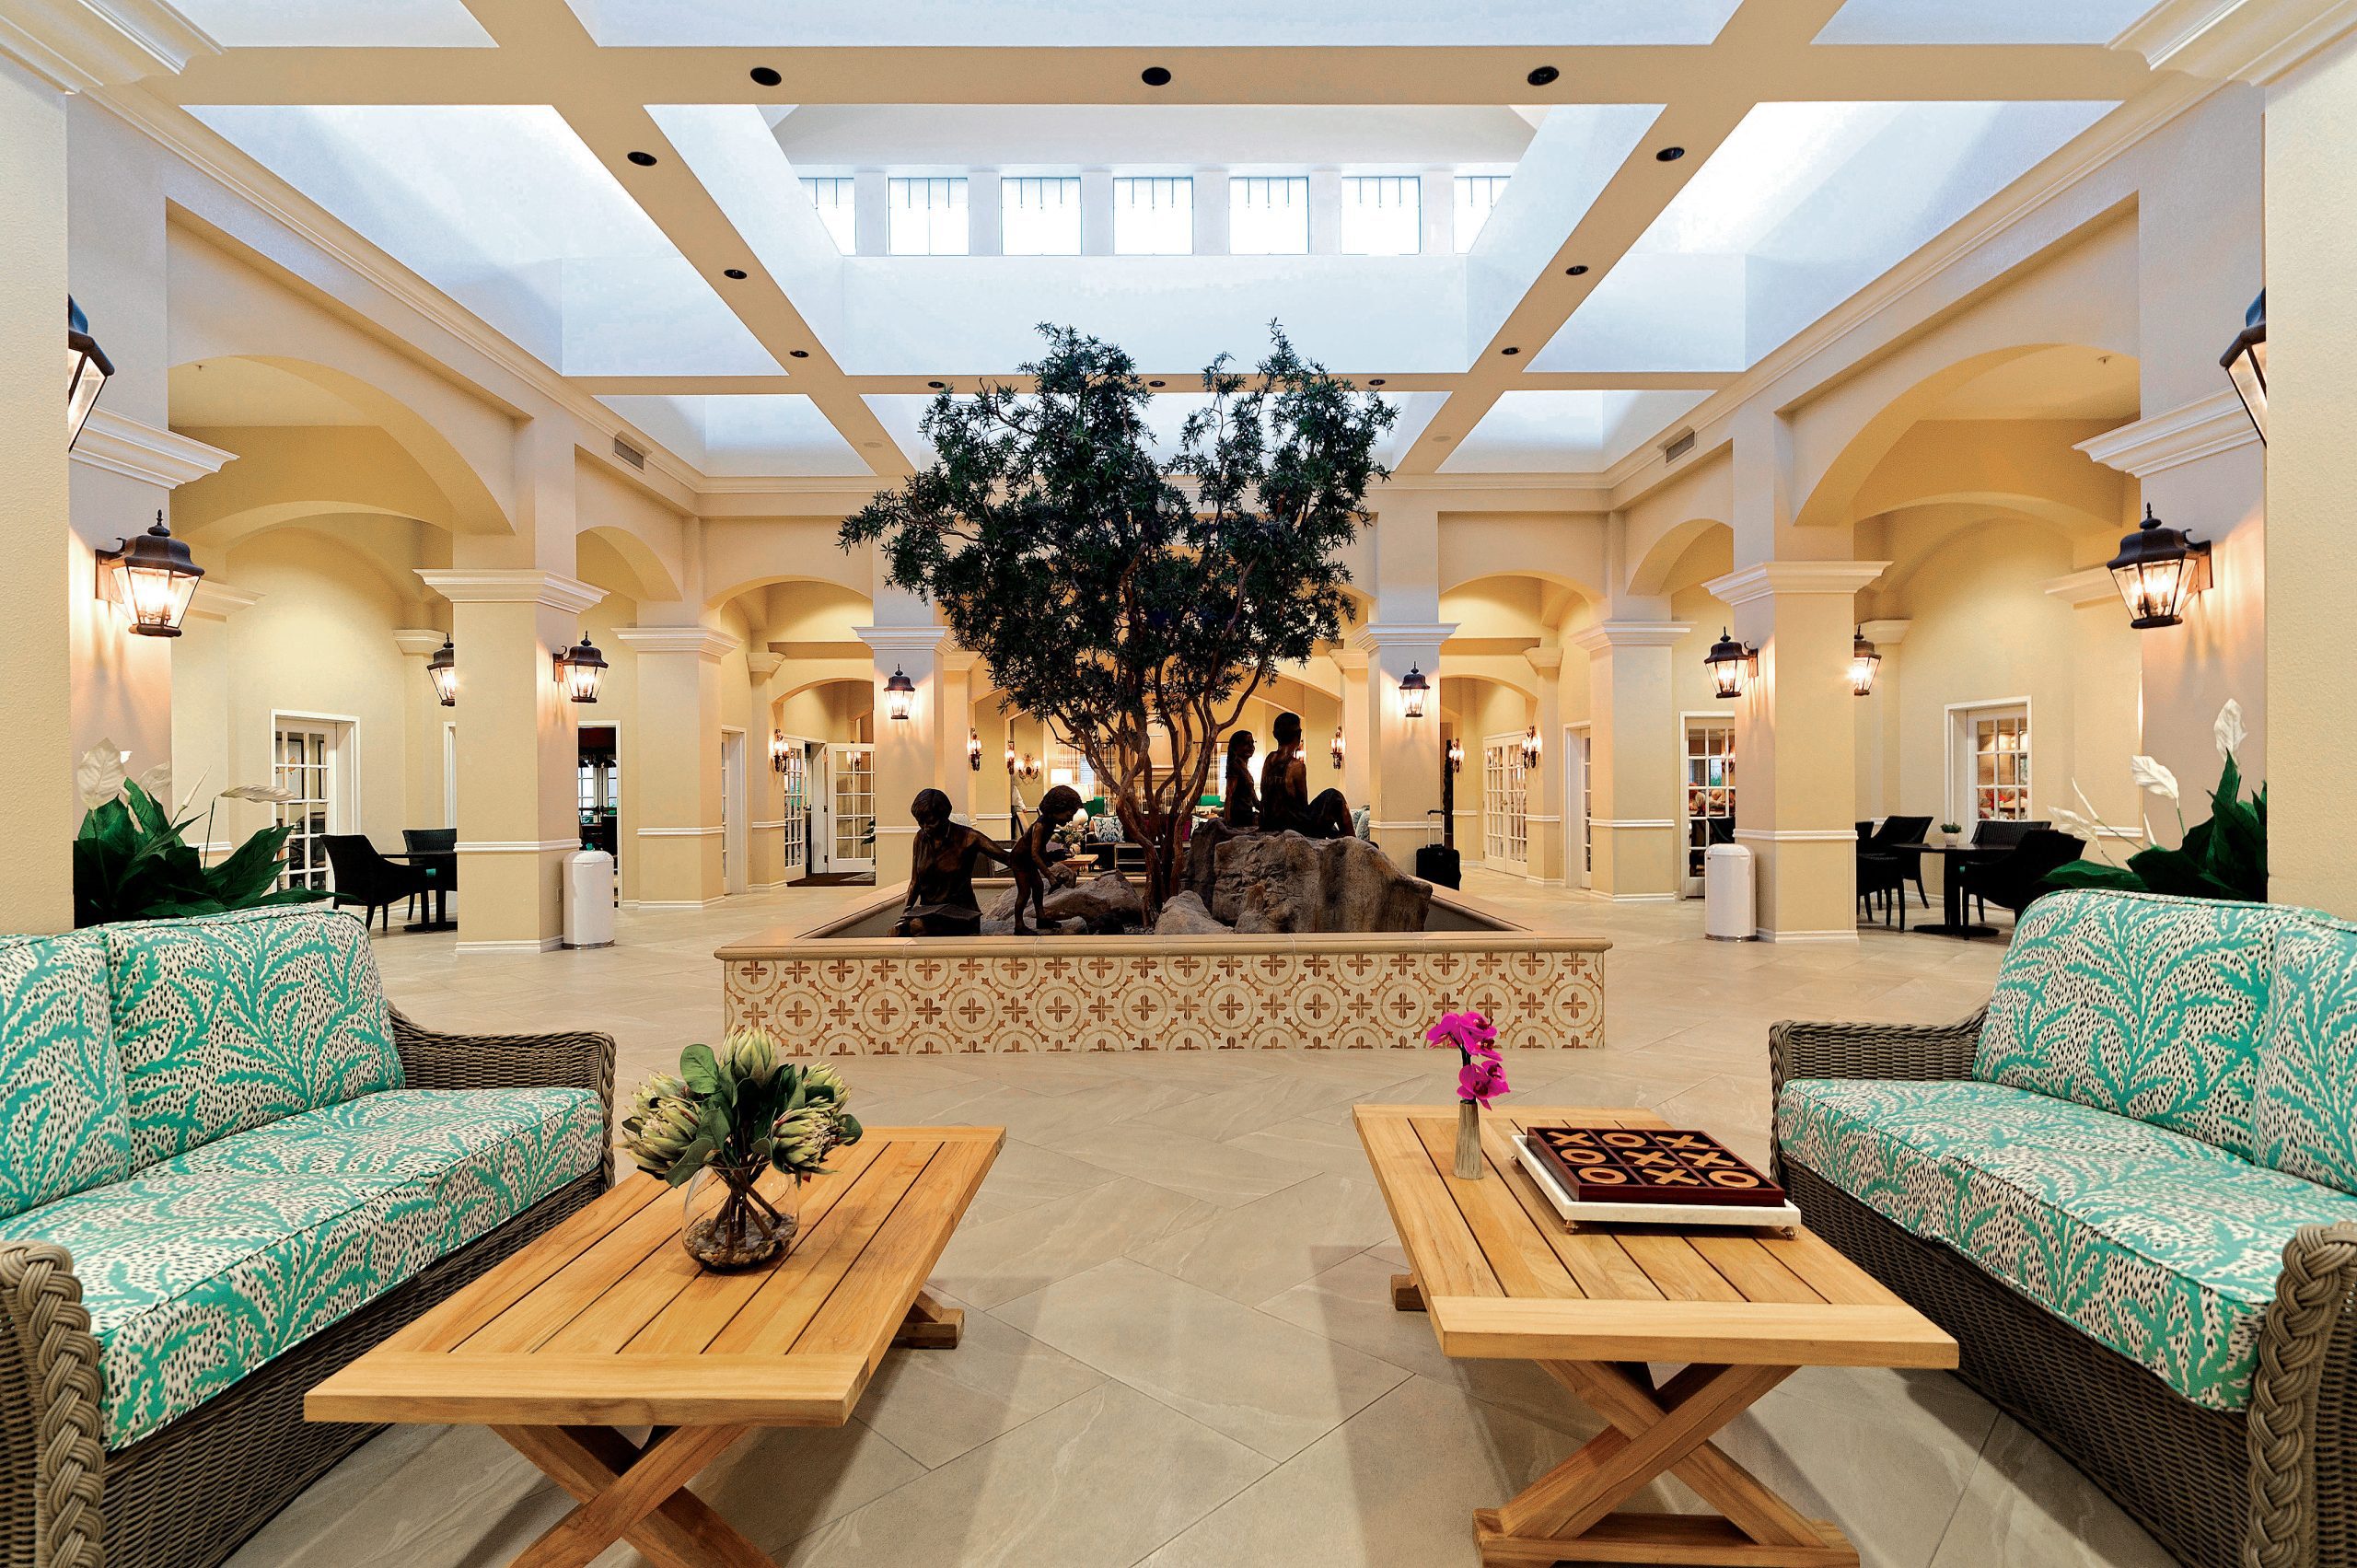 A spacious lobby with comfortable seating arrangements and tables for guests to relax and socialize.